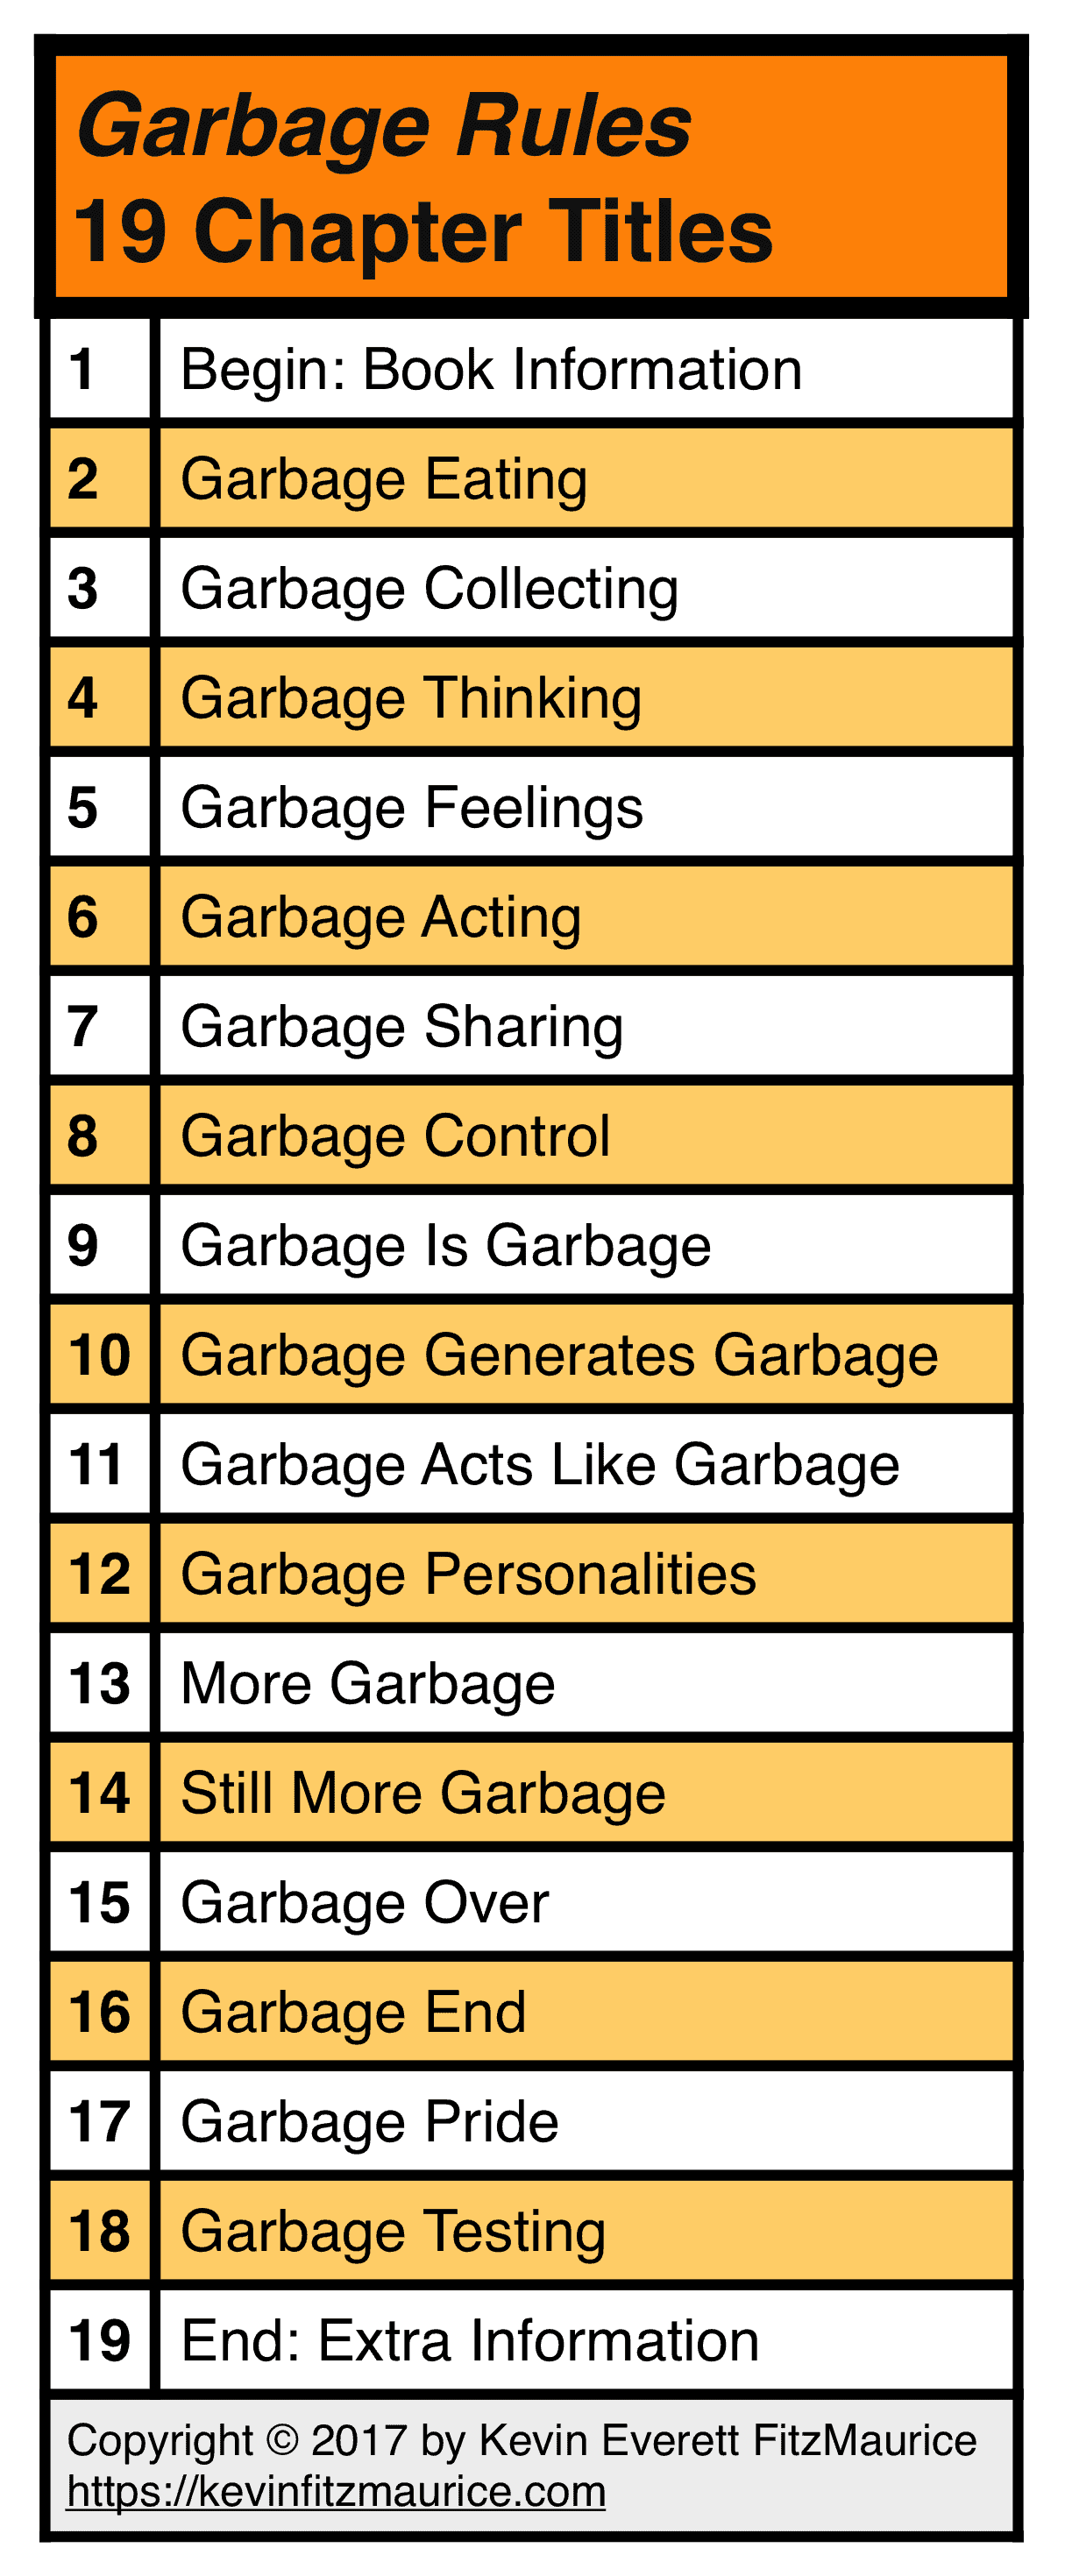 GARBAGE RULES 19 Chapter Titles